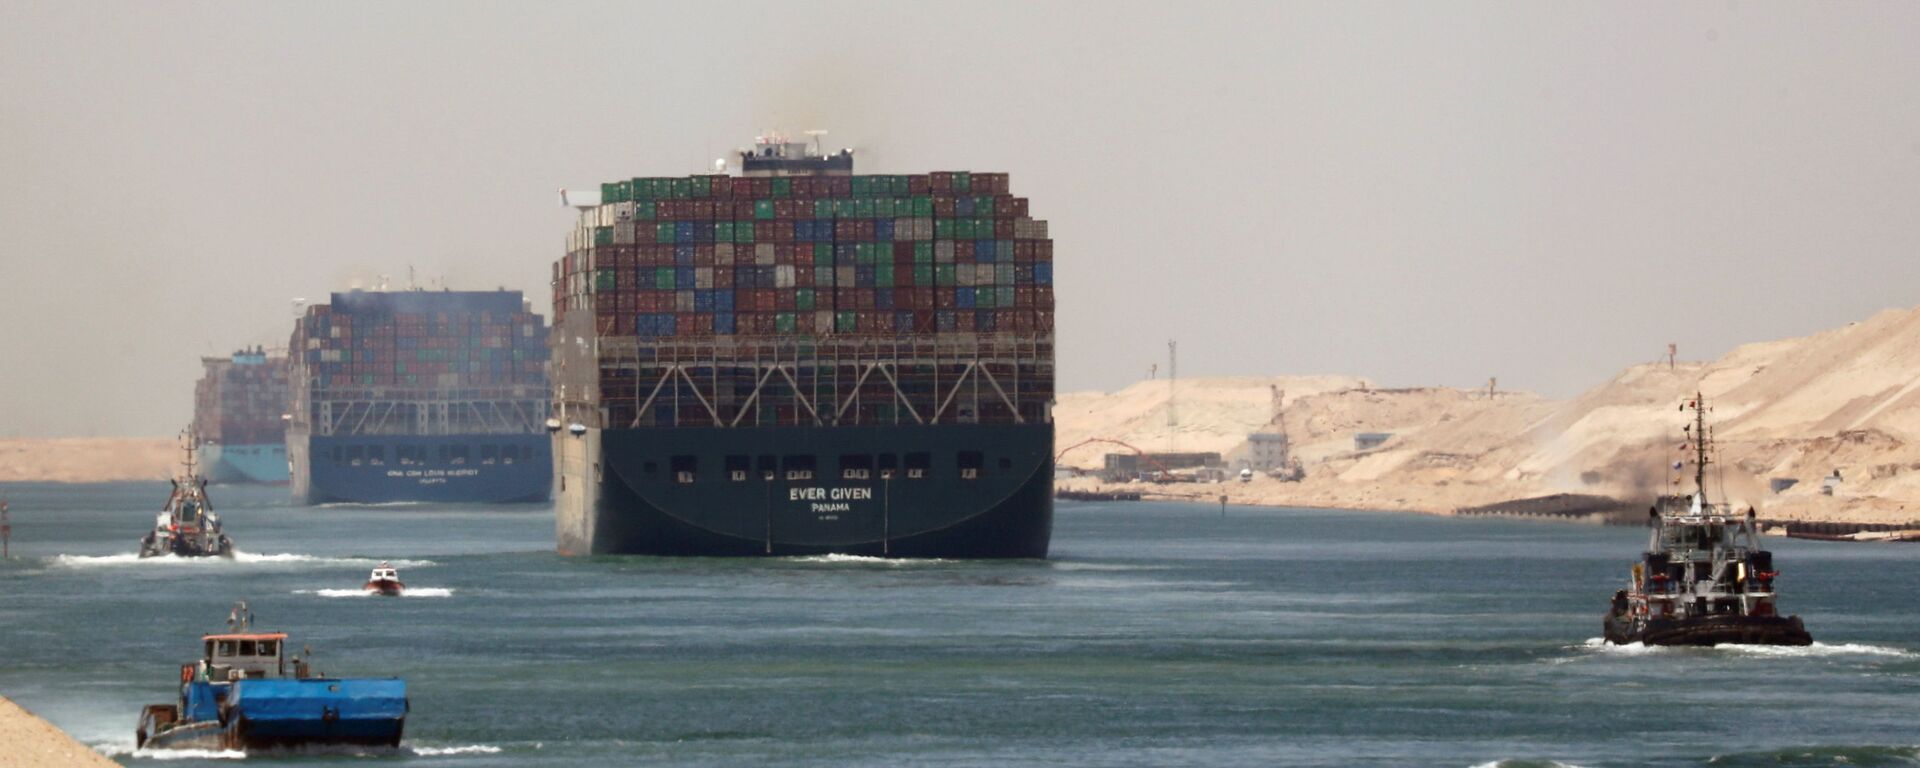 FILE PHOTO: Ever Given, one of the world's largest container ships, sets sail to leave through Suez Canal after the canal authority reached a settlement with the vessel's owner and insurers, in Ismailia, Egypt, July 7, 2021. - Sputnik International, 1920, 19.08.2021